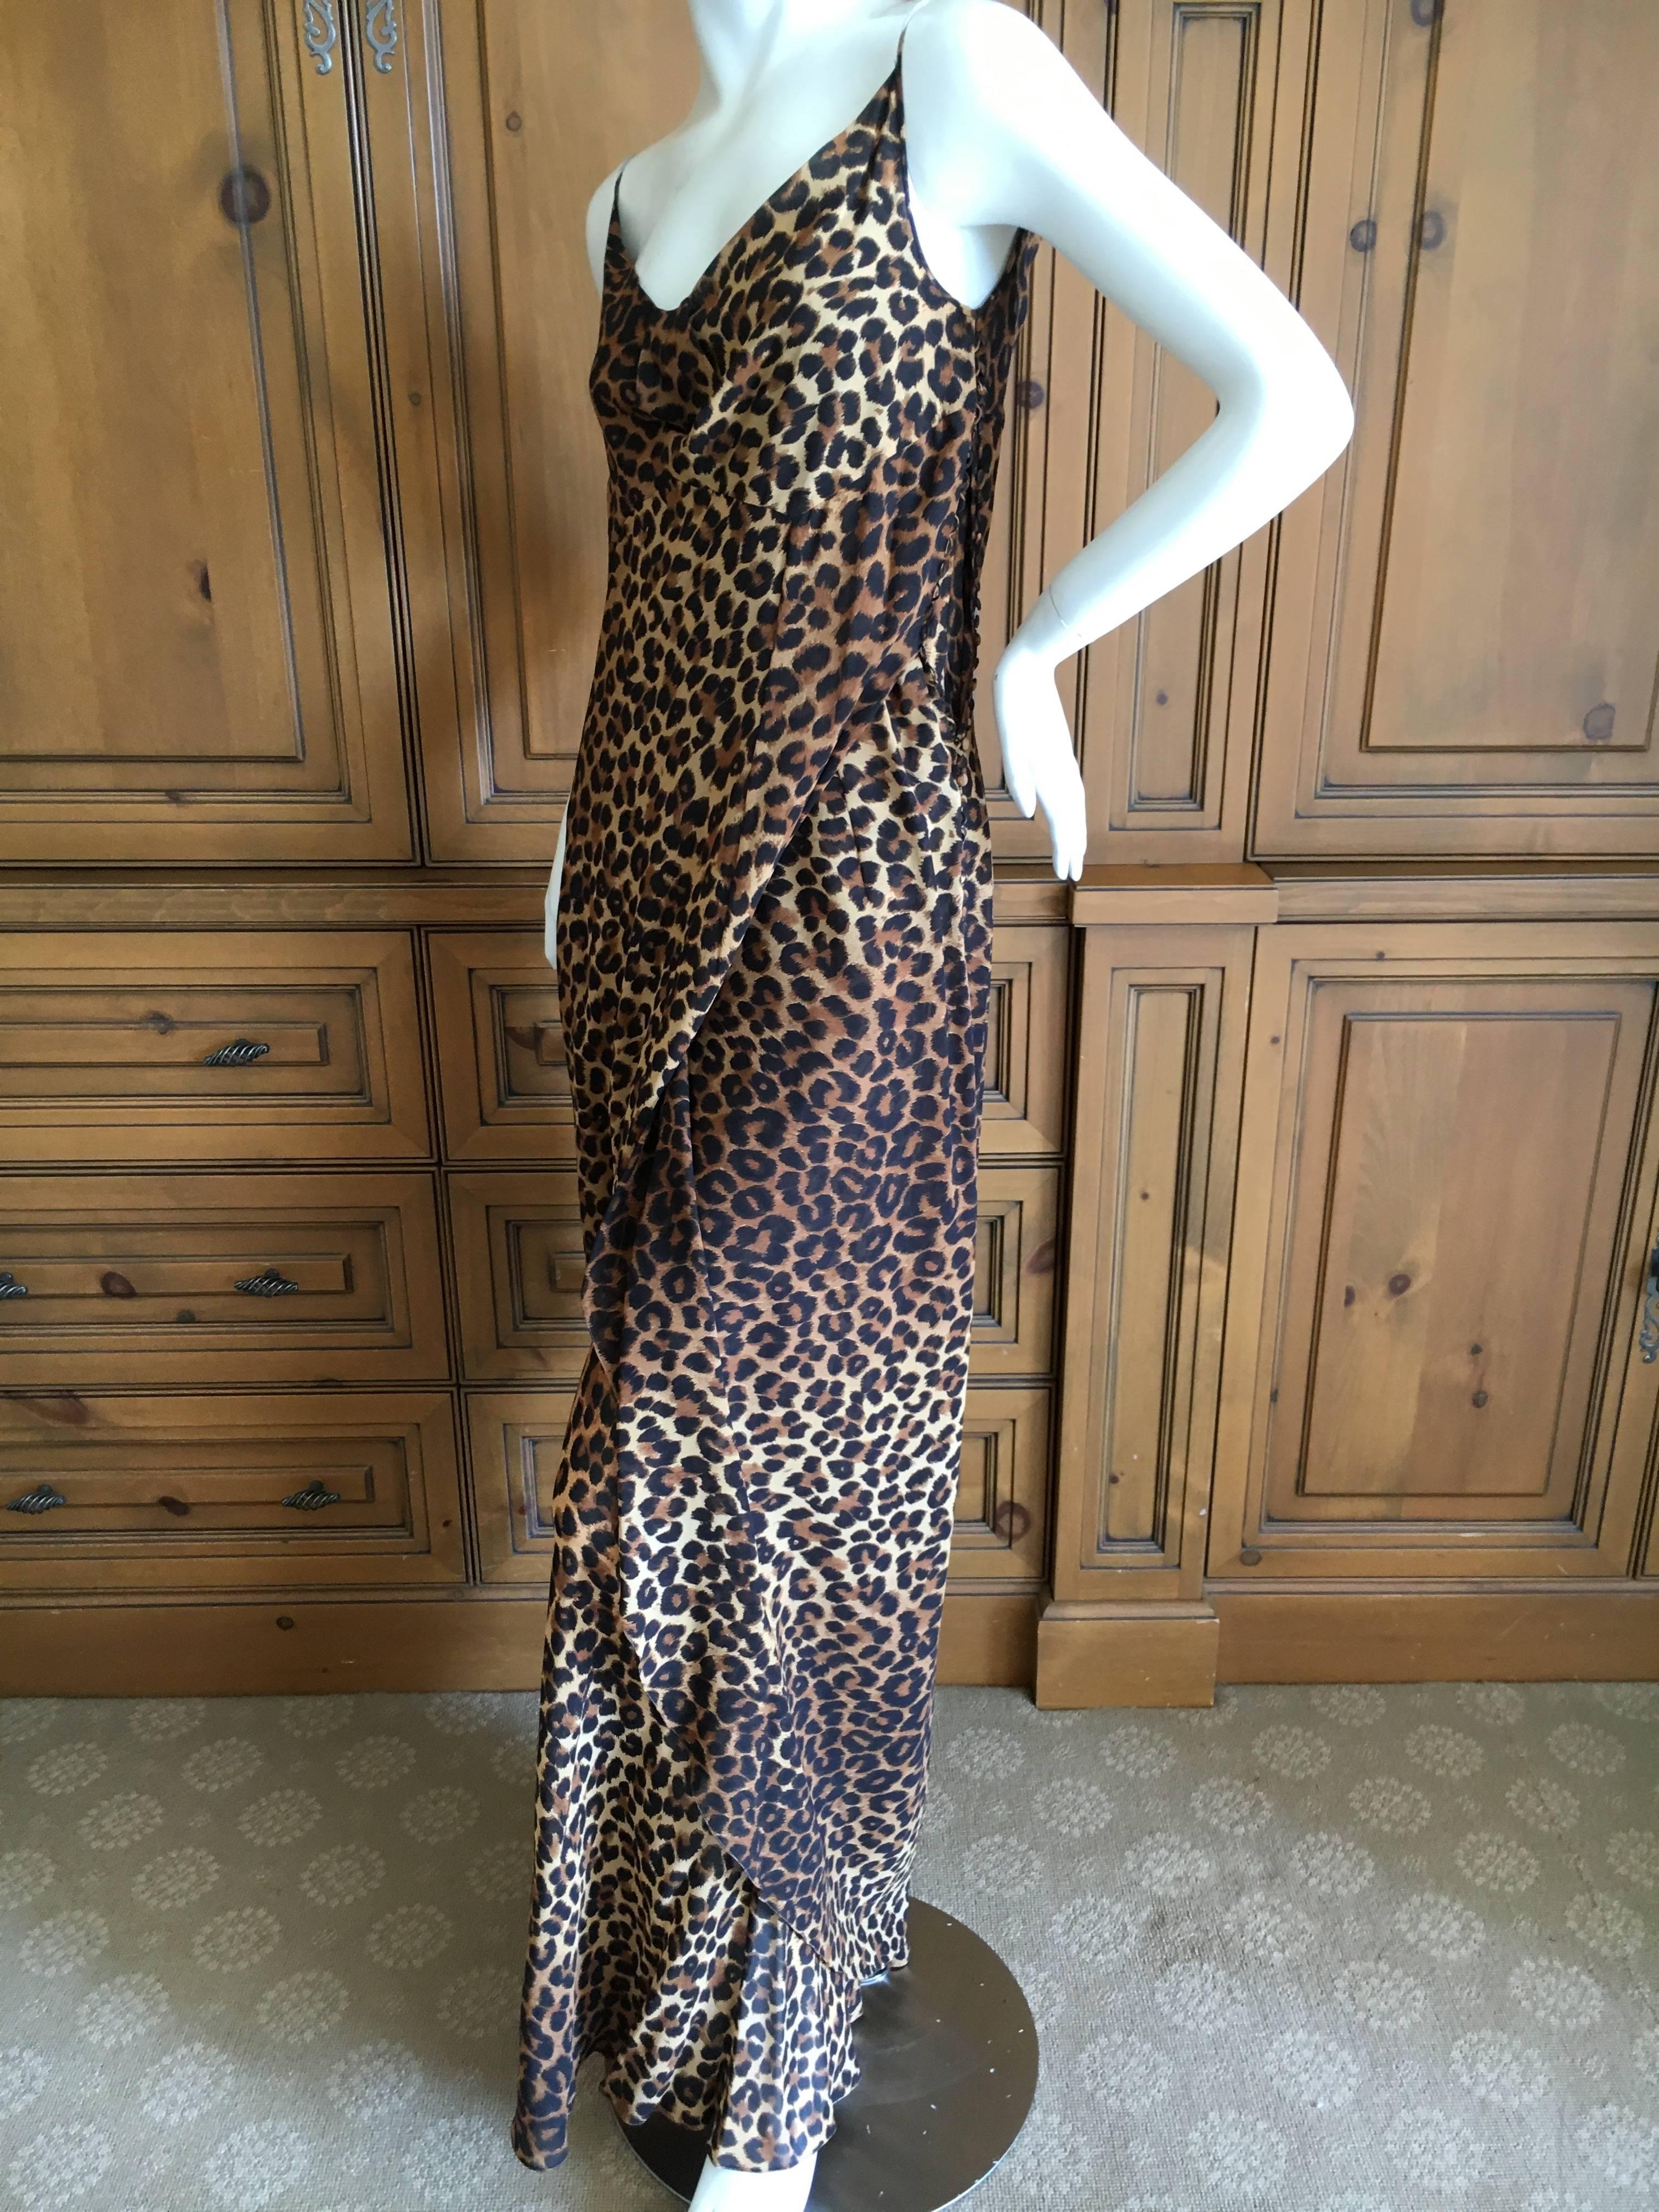 John Galliano Bergdorf Goodman 1989 Leopard Dress In Excellent Condition For Sale In Cloverdale, CA